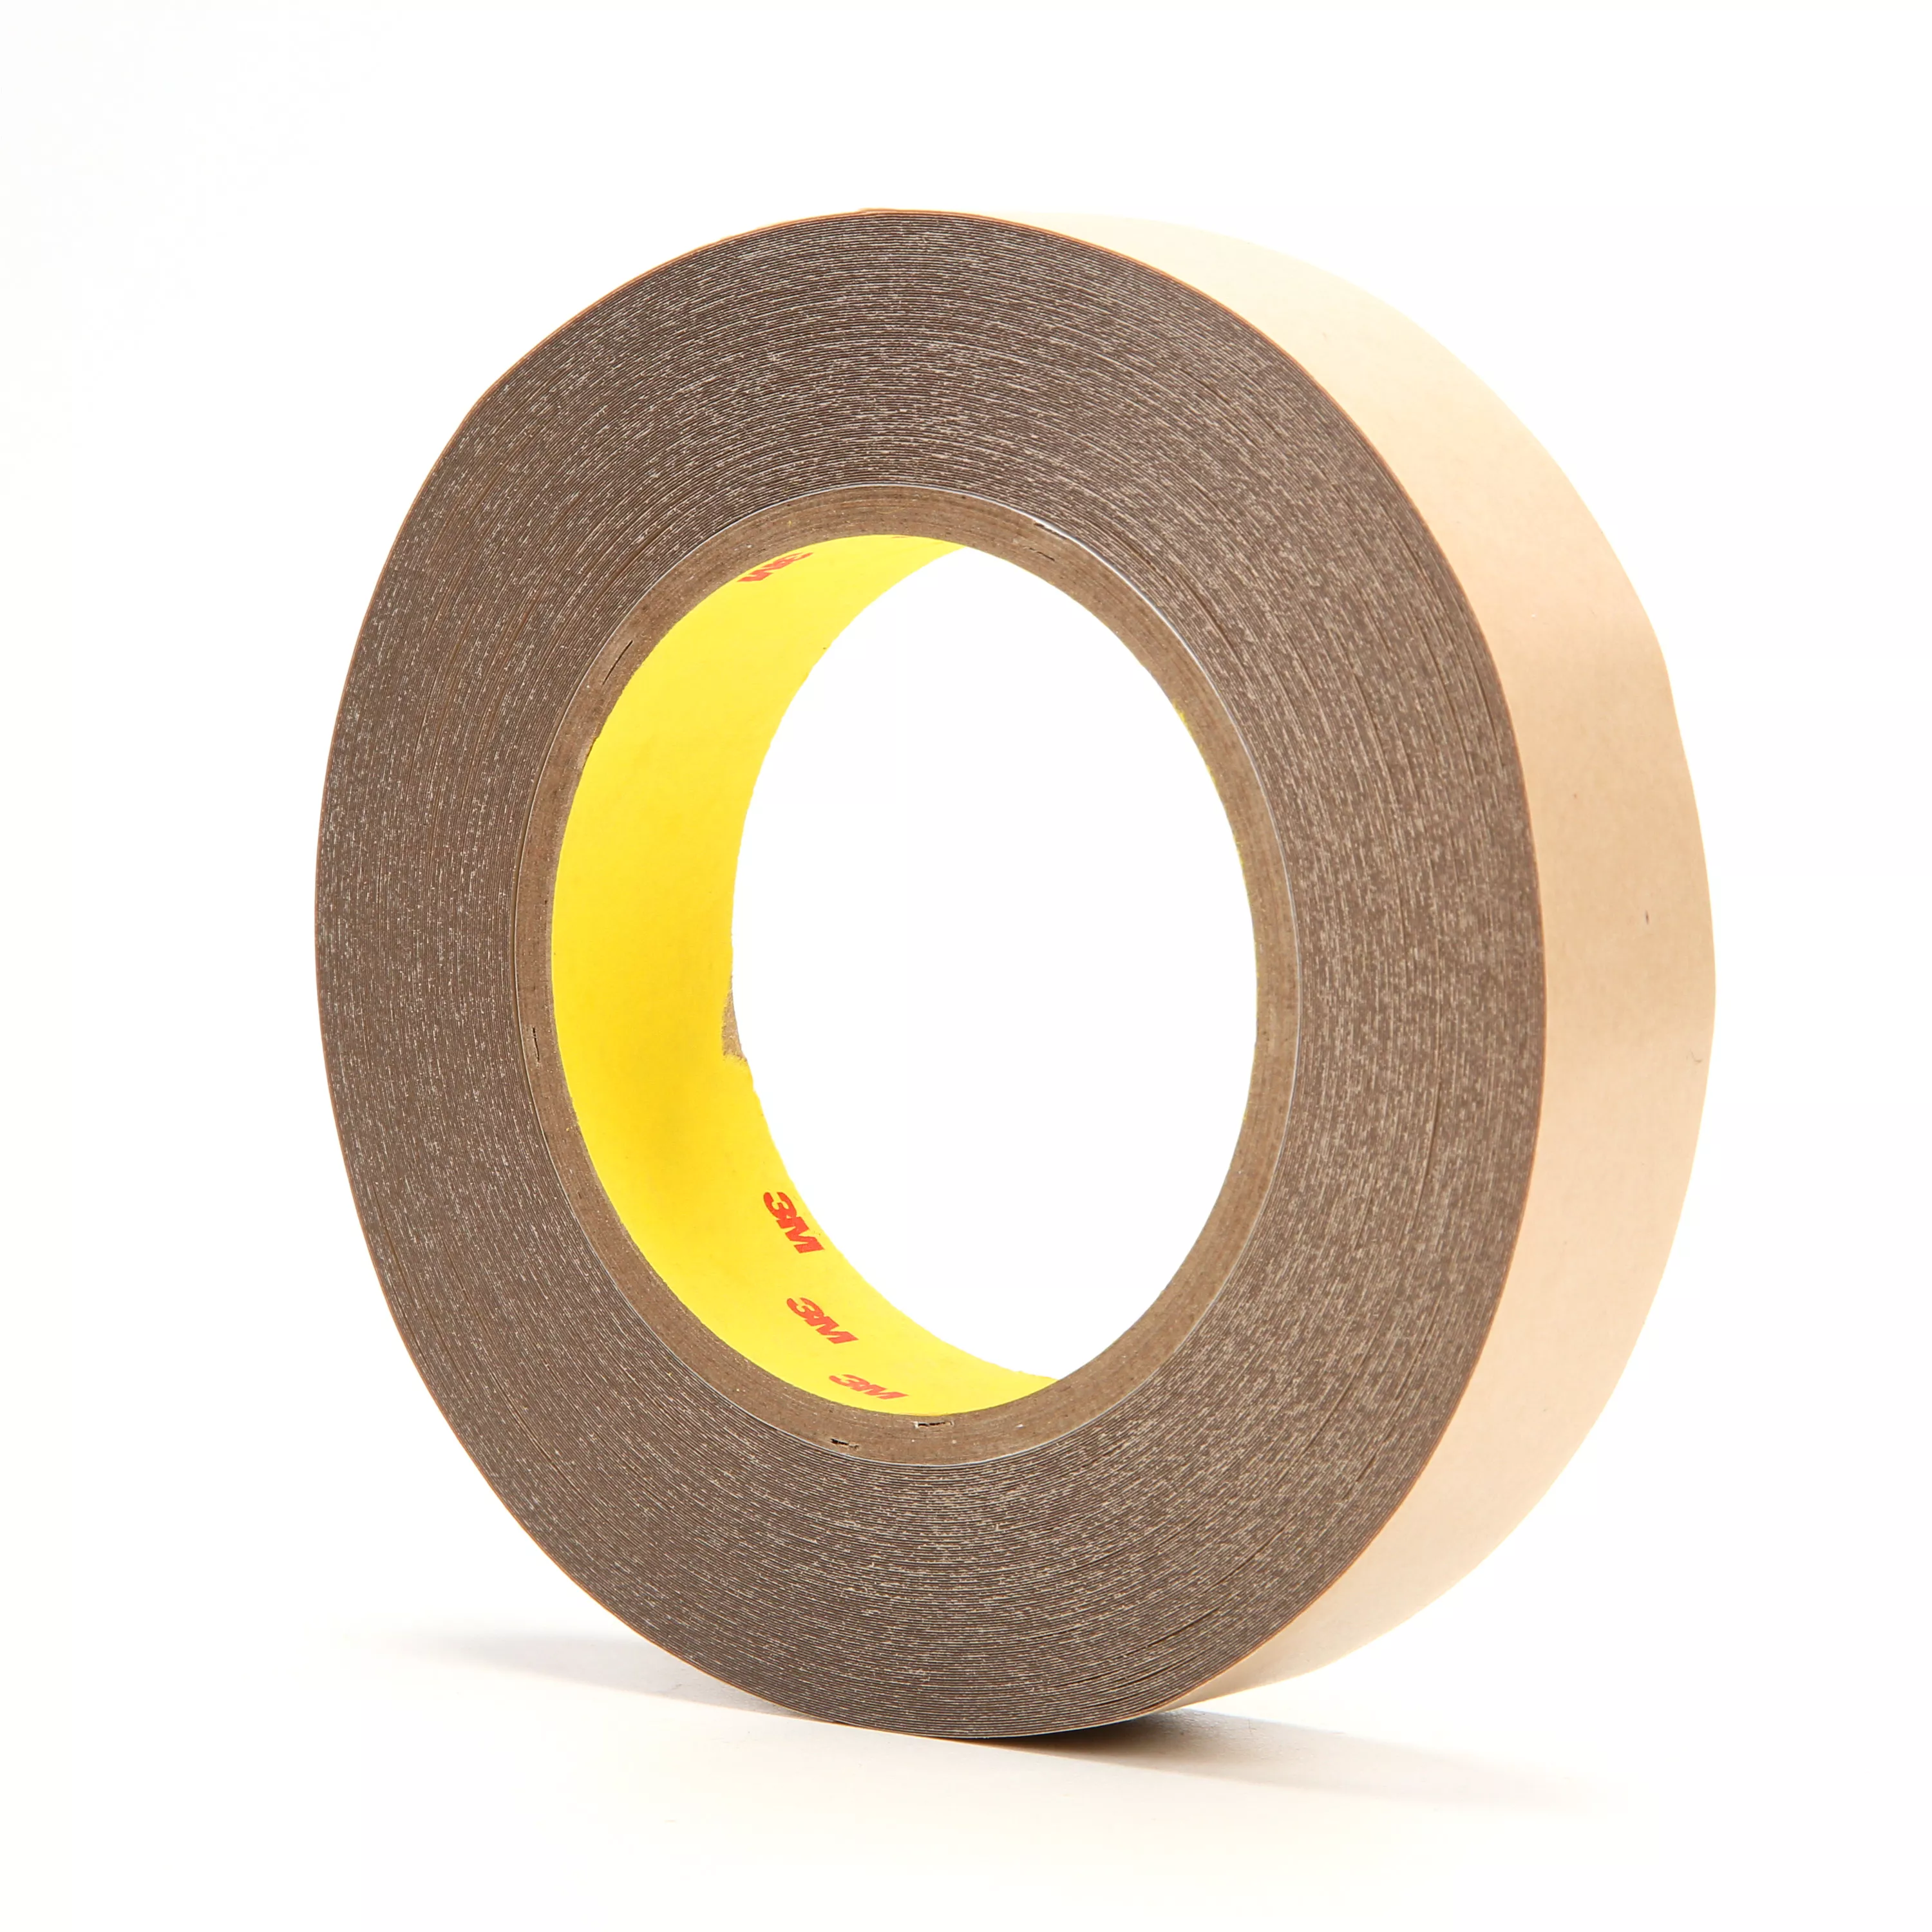 3M™ Double Coated Tape 9500PC, Clear, 1 in x 36 yd, 5.6 mil, 36
Roll/Case